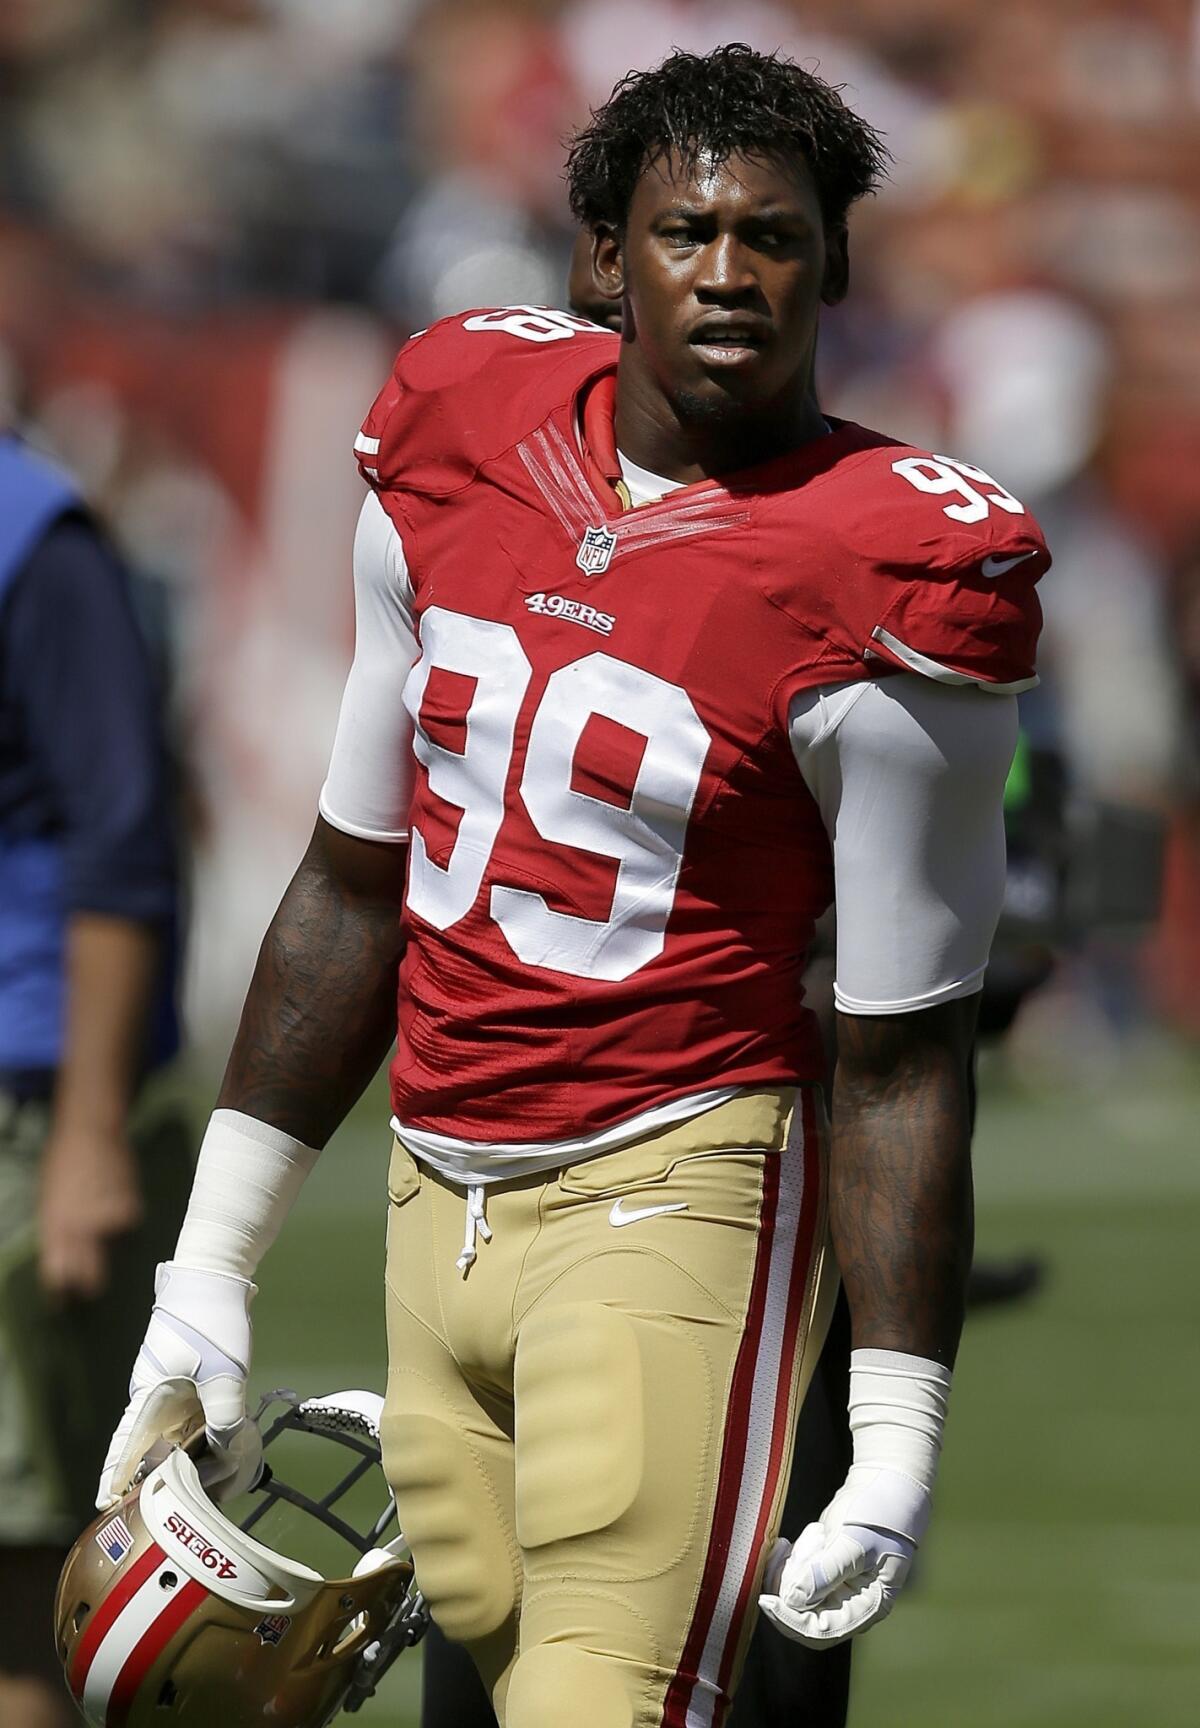 San Francisco 49ers linebacker Aldon Smith apologized Sunday for his recent off-field problems.